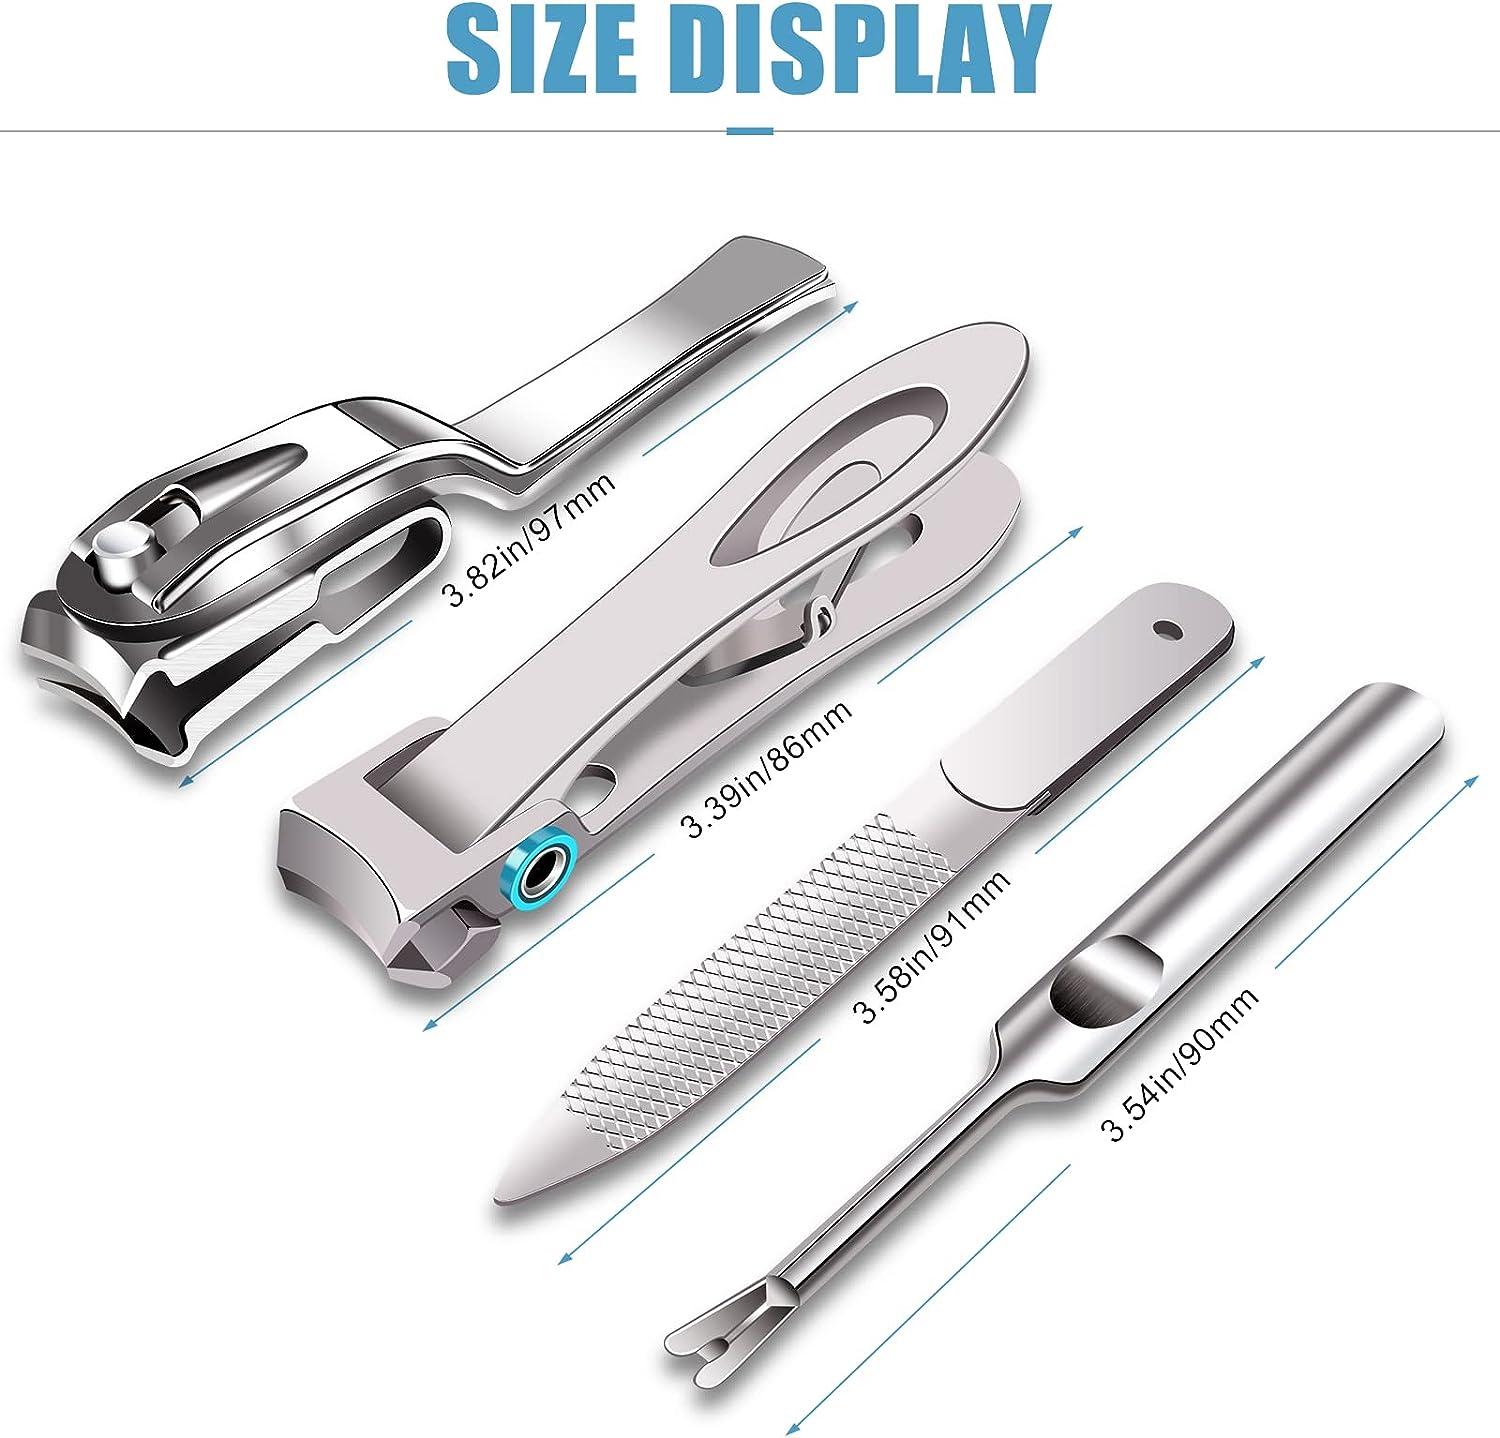 Nail Clippers for Thick Nails - Dr. Mode 15mm Wide Jaw Opening Extra Large Toenail Clippers Cutter with Nail File for Thick Nails, Heavy Duty Fingern